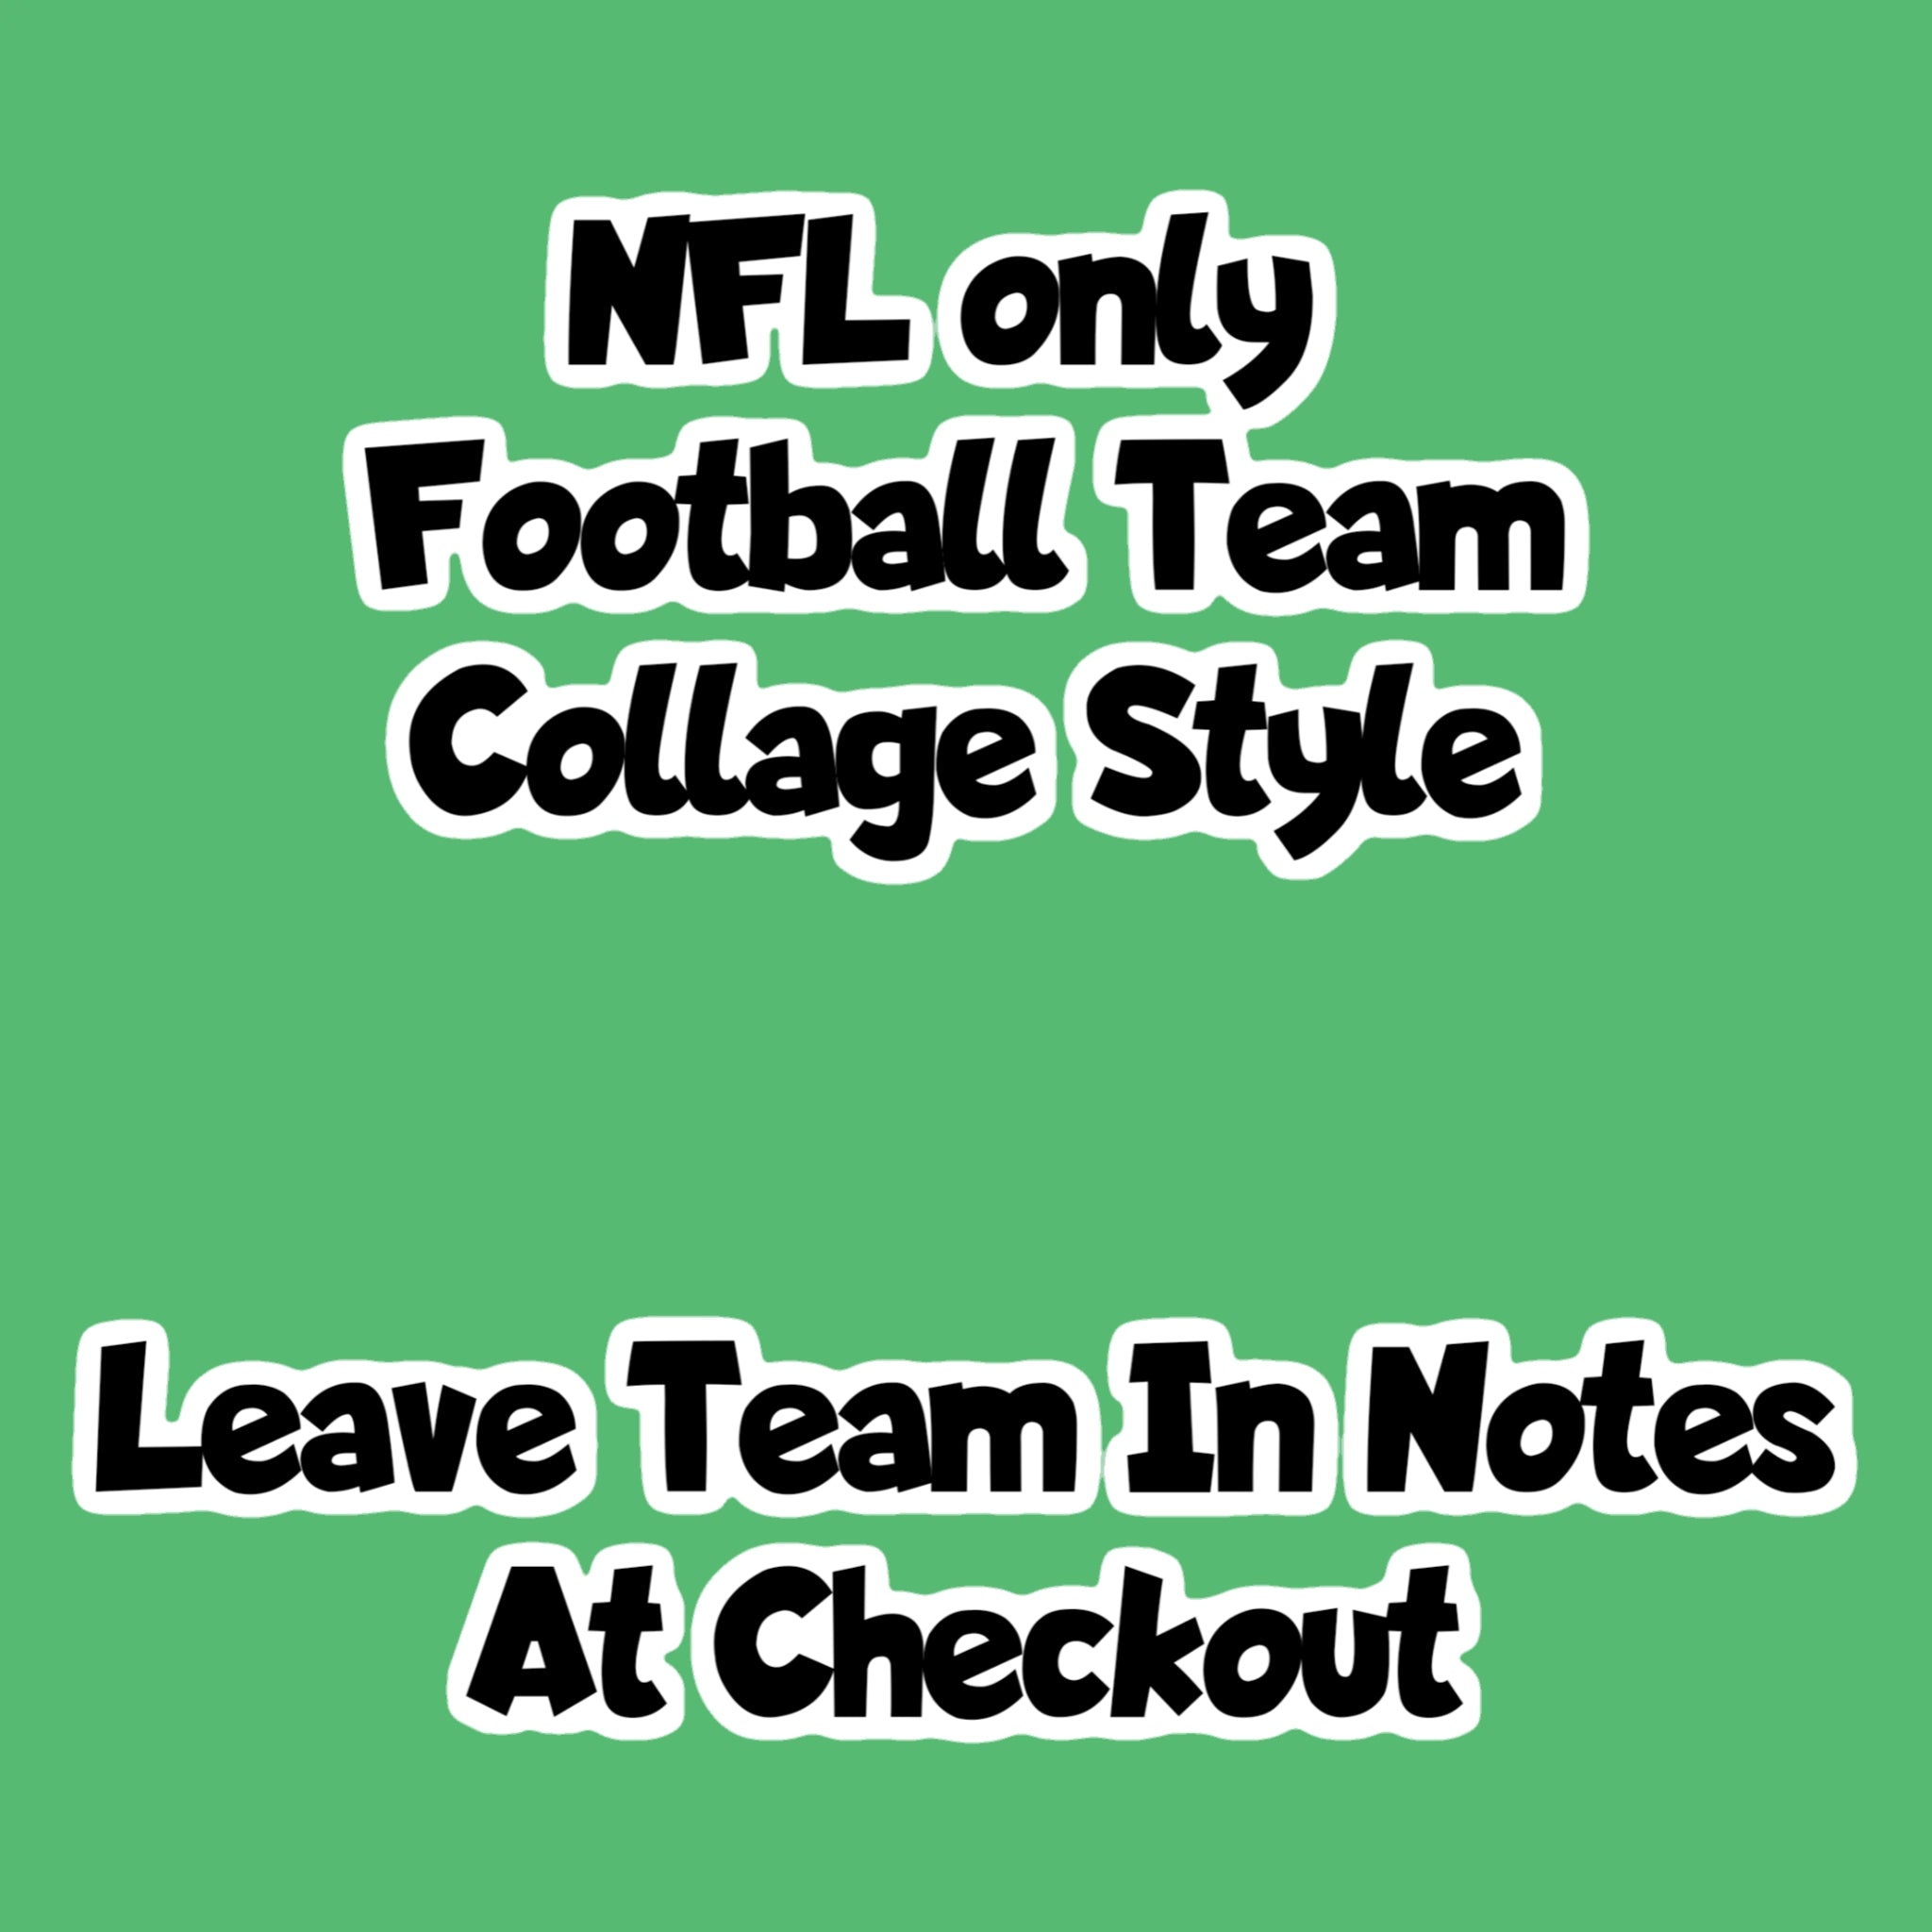 Football Team Collage Style (Leave Team In Notes At Checkout)